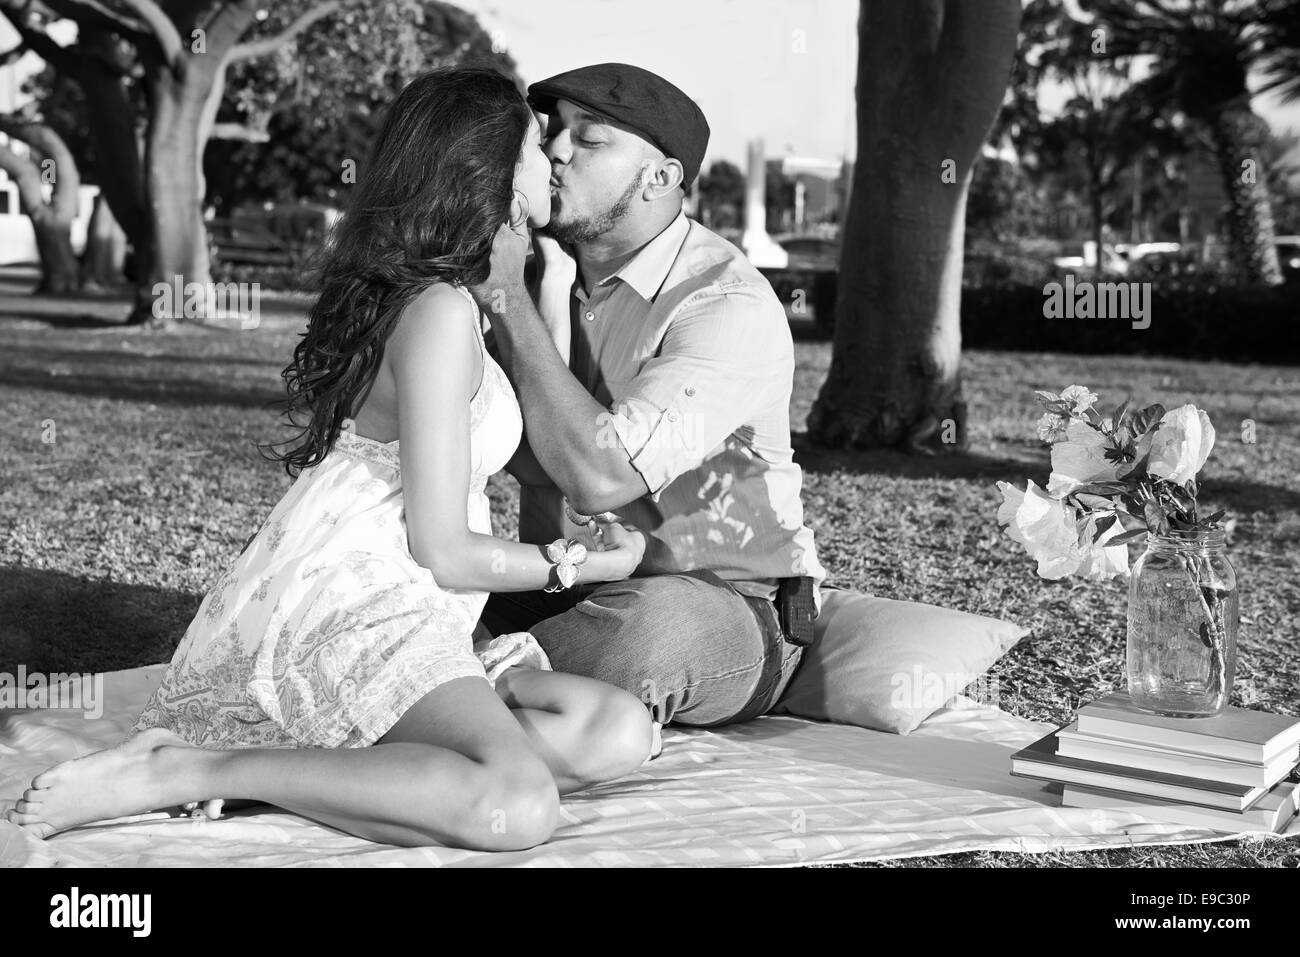 couple kissing in park during a picnic in black and white Stock Photo